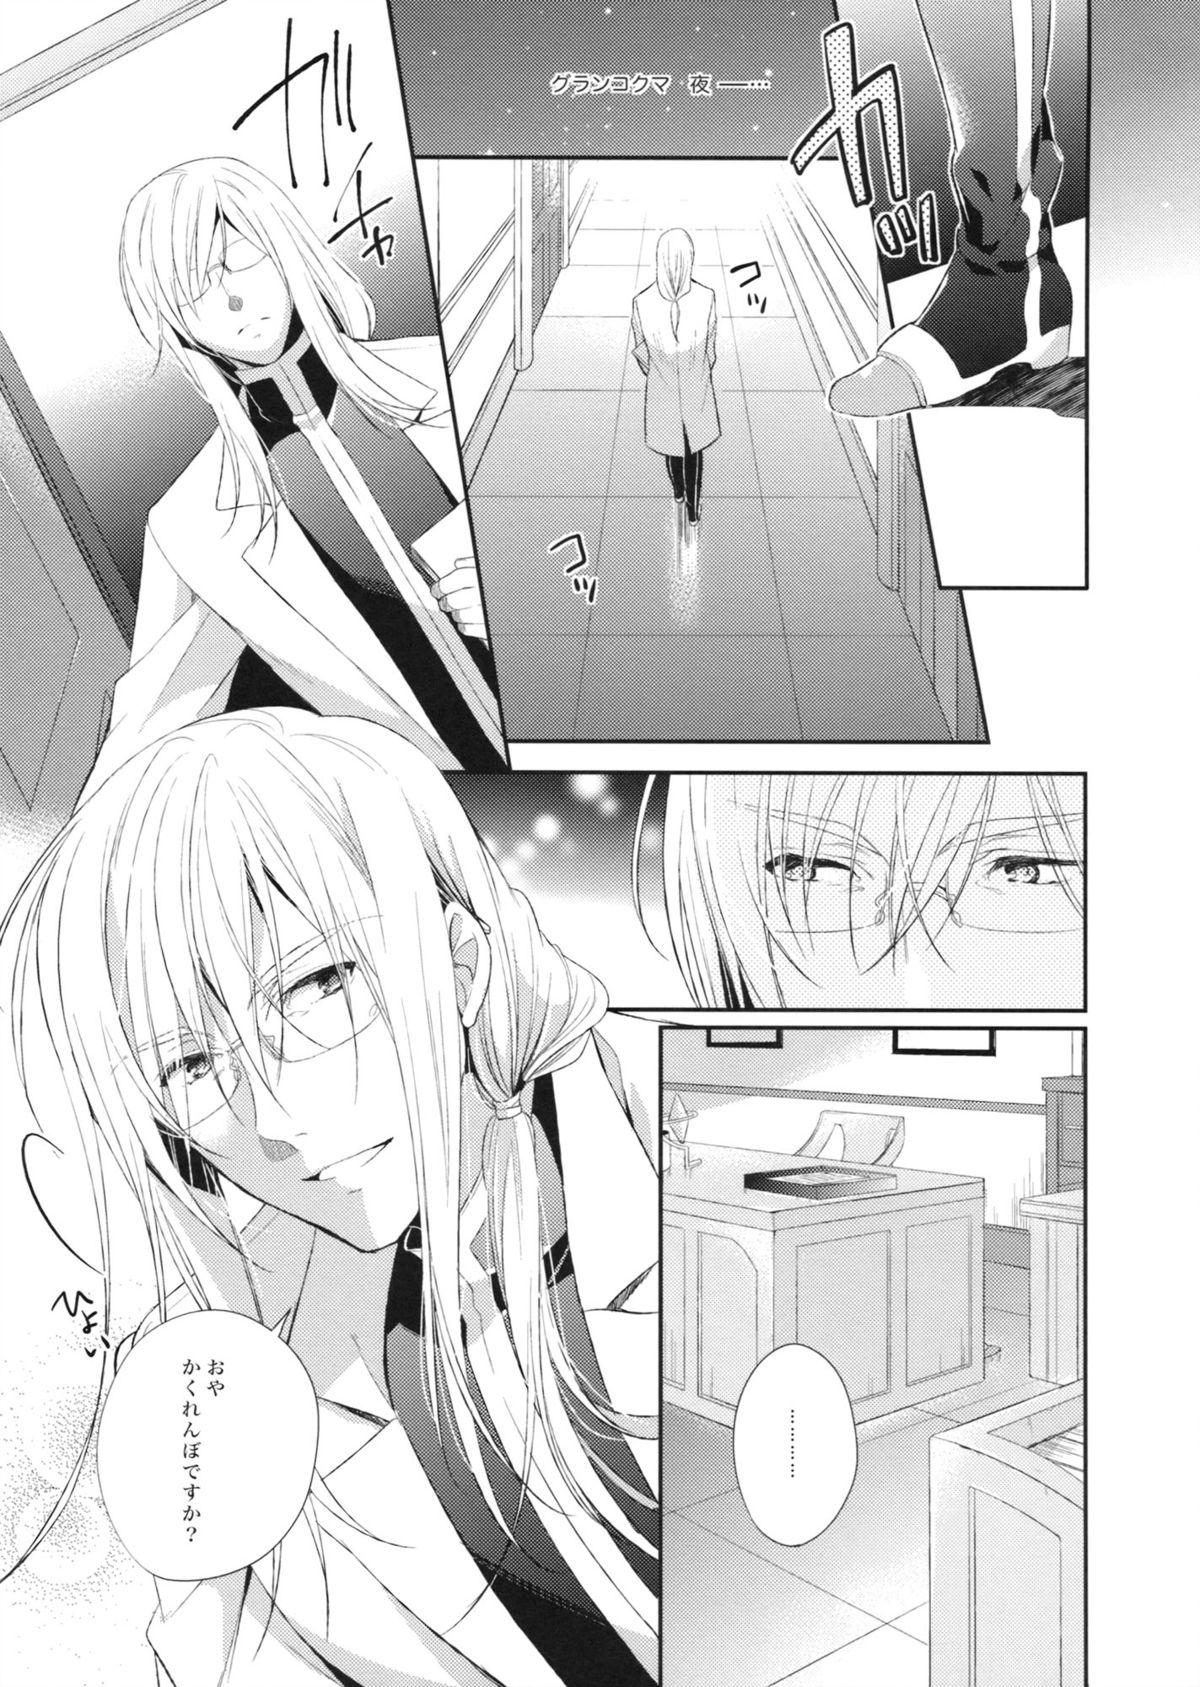 Throat Oose no Mama ni - Tales of the abyss Spycam - Page 2